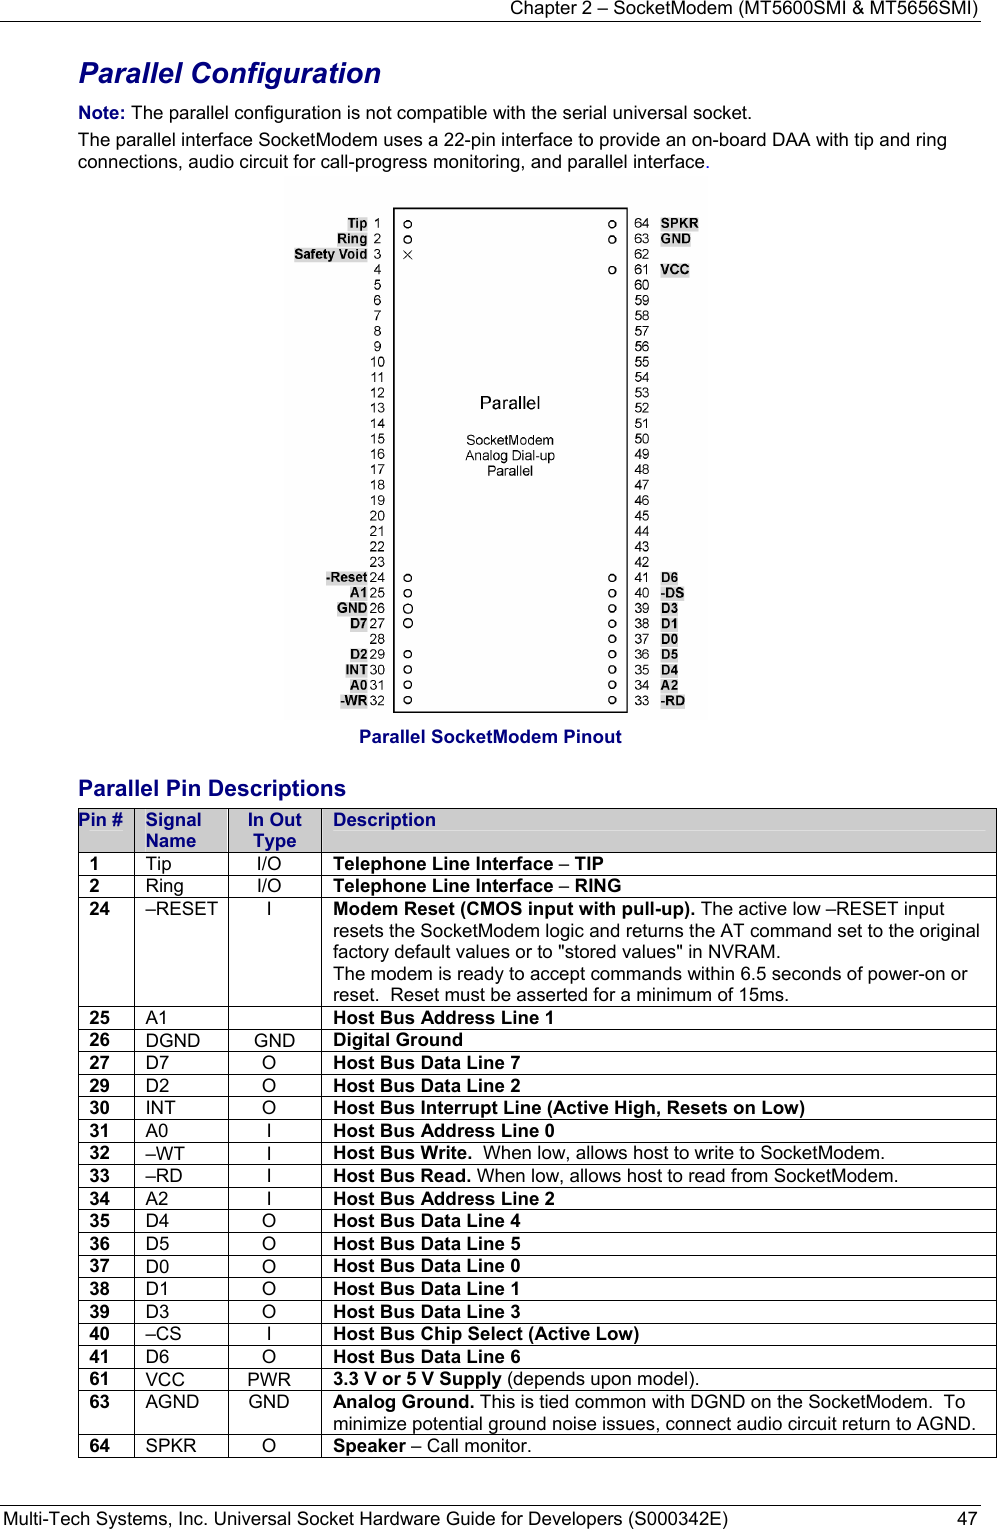 Chapter 2 – SocketModem (MT5600SMI &amp; MT5656SMI) Multi-Tech Systems, Inc. Universal Socket Hardware Guide for Developers (S000342E)  47  Parallel Configuration Note: The parallel configuration is not compatible with the serial universal socket. The parallel interface SocketModem uses a 22-pin interface to provide an on-board DAA with tip and ring connections, audio circuit for call-progress monitoring, and parallel interface.  Parallel SocketModem Pinout  Parallel Pin Descriptions Pin #  Signal Name In Out Type Description 1  Tip I/O Telephone Line Interface – TIP  2  Ring I/O Telephone Line Interface – RING 24  –RESET I  Modem Reset (CMOS input with pull-up). The active low –RESET input resets the SocketModem logic and returns the AT command set to the original factory default values or to &quot;stored values&quot; in NVRAM. The modem is ready to accept commands within 6.5 seconds of power-on or reset.  Reset must be asserted for a minimum of 15ms. 25  A1  Host Bus Address Line 1 26  DGND GND Digital Ground 27  D7 O Host Bus Data Line 7 29  D2 O Host Bus Data Line 2 30  INT O Host Bus Interrupt Line (Active High, Resets on Low) 31  A0 I Host Bus Address Line 0 32  –WT I Host Bus Write.  When low, allows host to write to SocketModem.  33  –RD I Host Bus Read. When low, allows host to read from SocketModem.  34  A2 I Host Bus Address Line 2 35  D4 O Host Bus Data Line 4 36  D5 O Host Bus Data Line 5 37  D0 O Host Bus Data Line 0 38  D1 O Host Bus Data Line 1 39  D3 O Host Bus Data Line 3 40  –CS I Host Bus Chip Select (Active Low)   41  D6 O Host Bus Data Line 6 61  VCC PWR 3.3 V or 5 V Supply (depends upon model). 63  AGND GND Analog Ground. This is tied common with DGND on the SocketModem.  To minimize potential ground noise issues, connect audio circuit return to AGND. 64  SPKR O Speaker – Call monitor.  